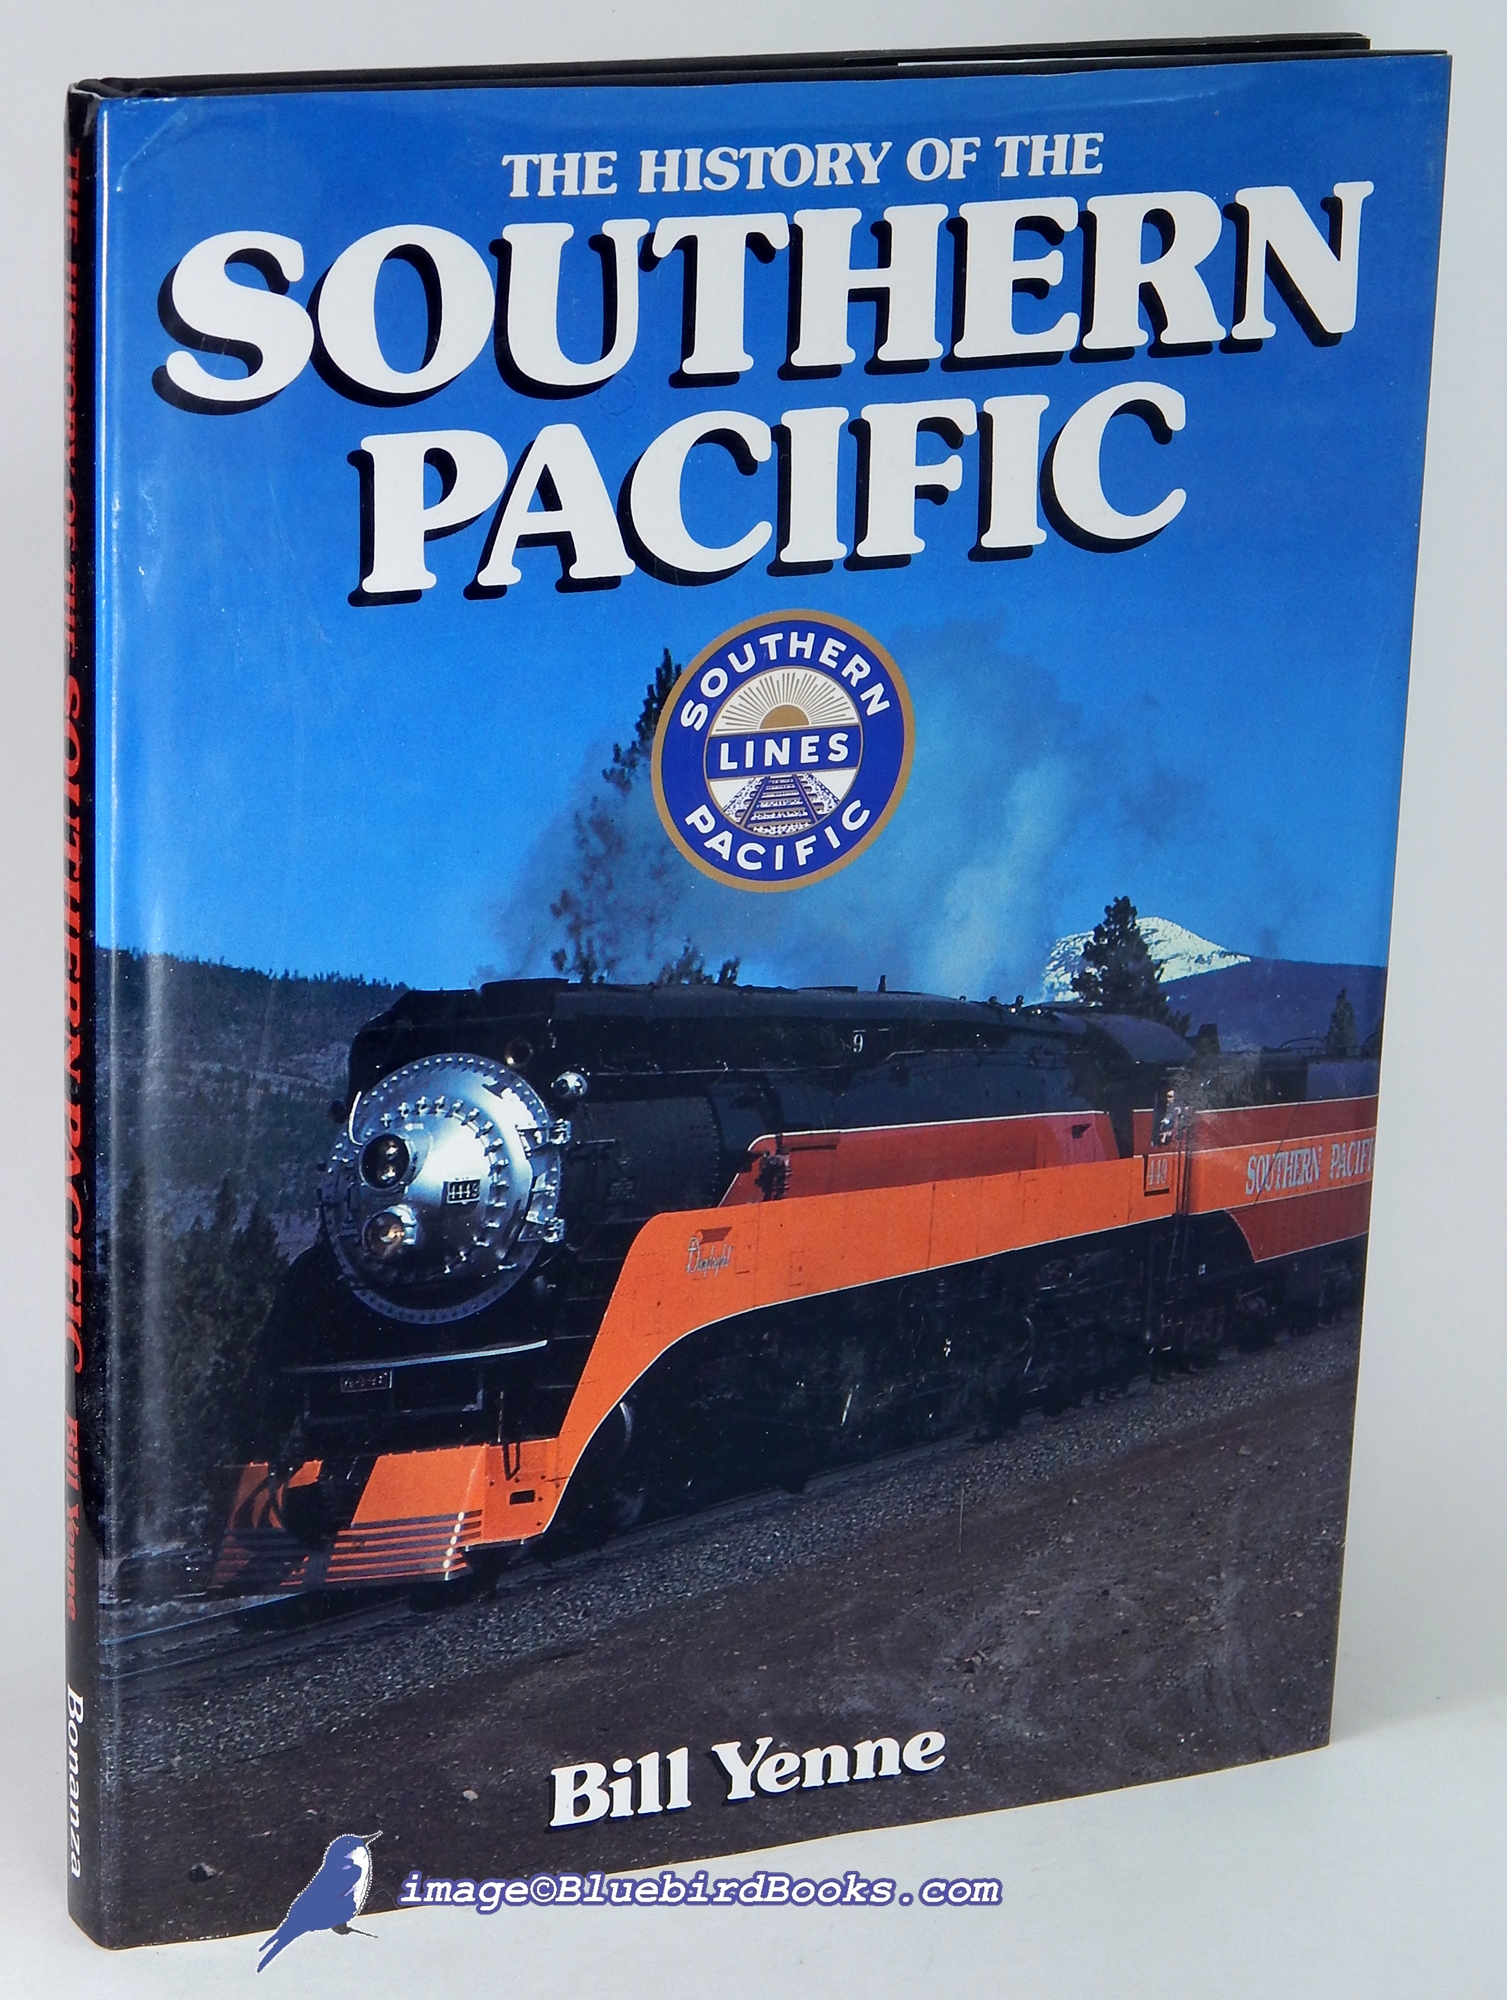 YENNE, BILL - The History of the Southern Pacific